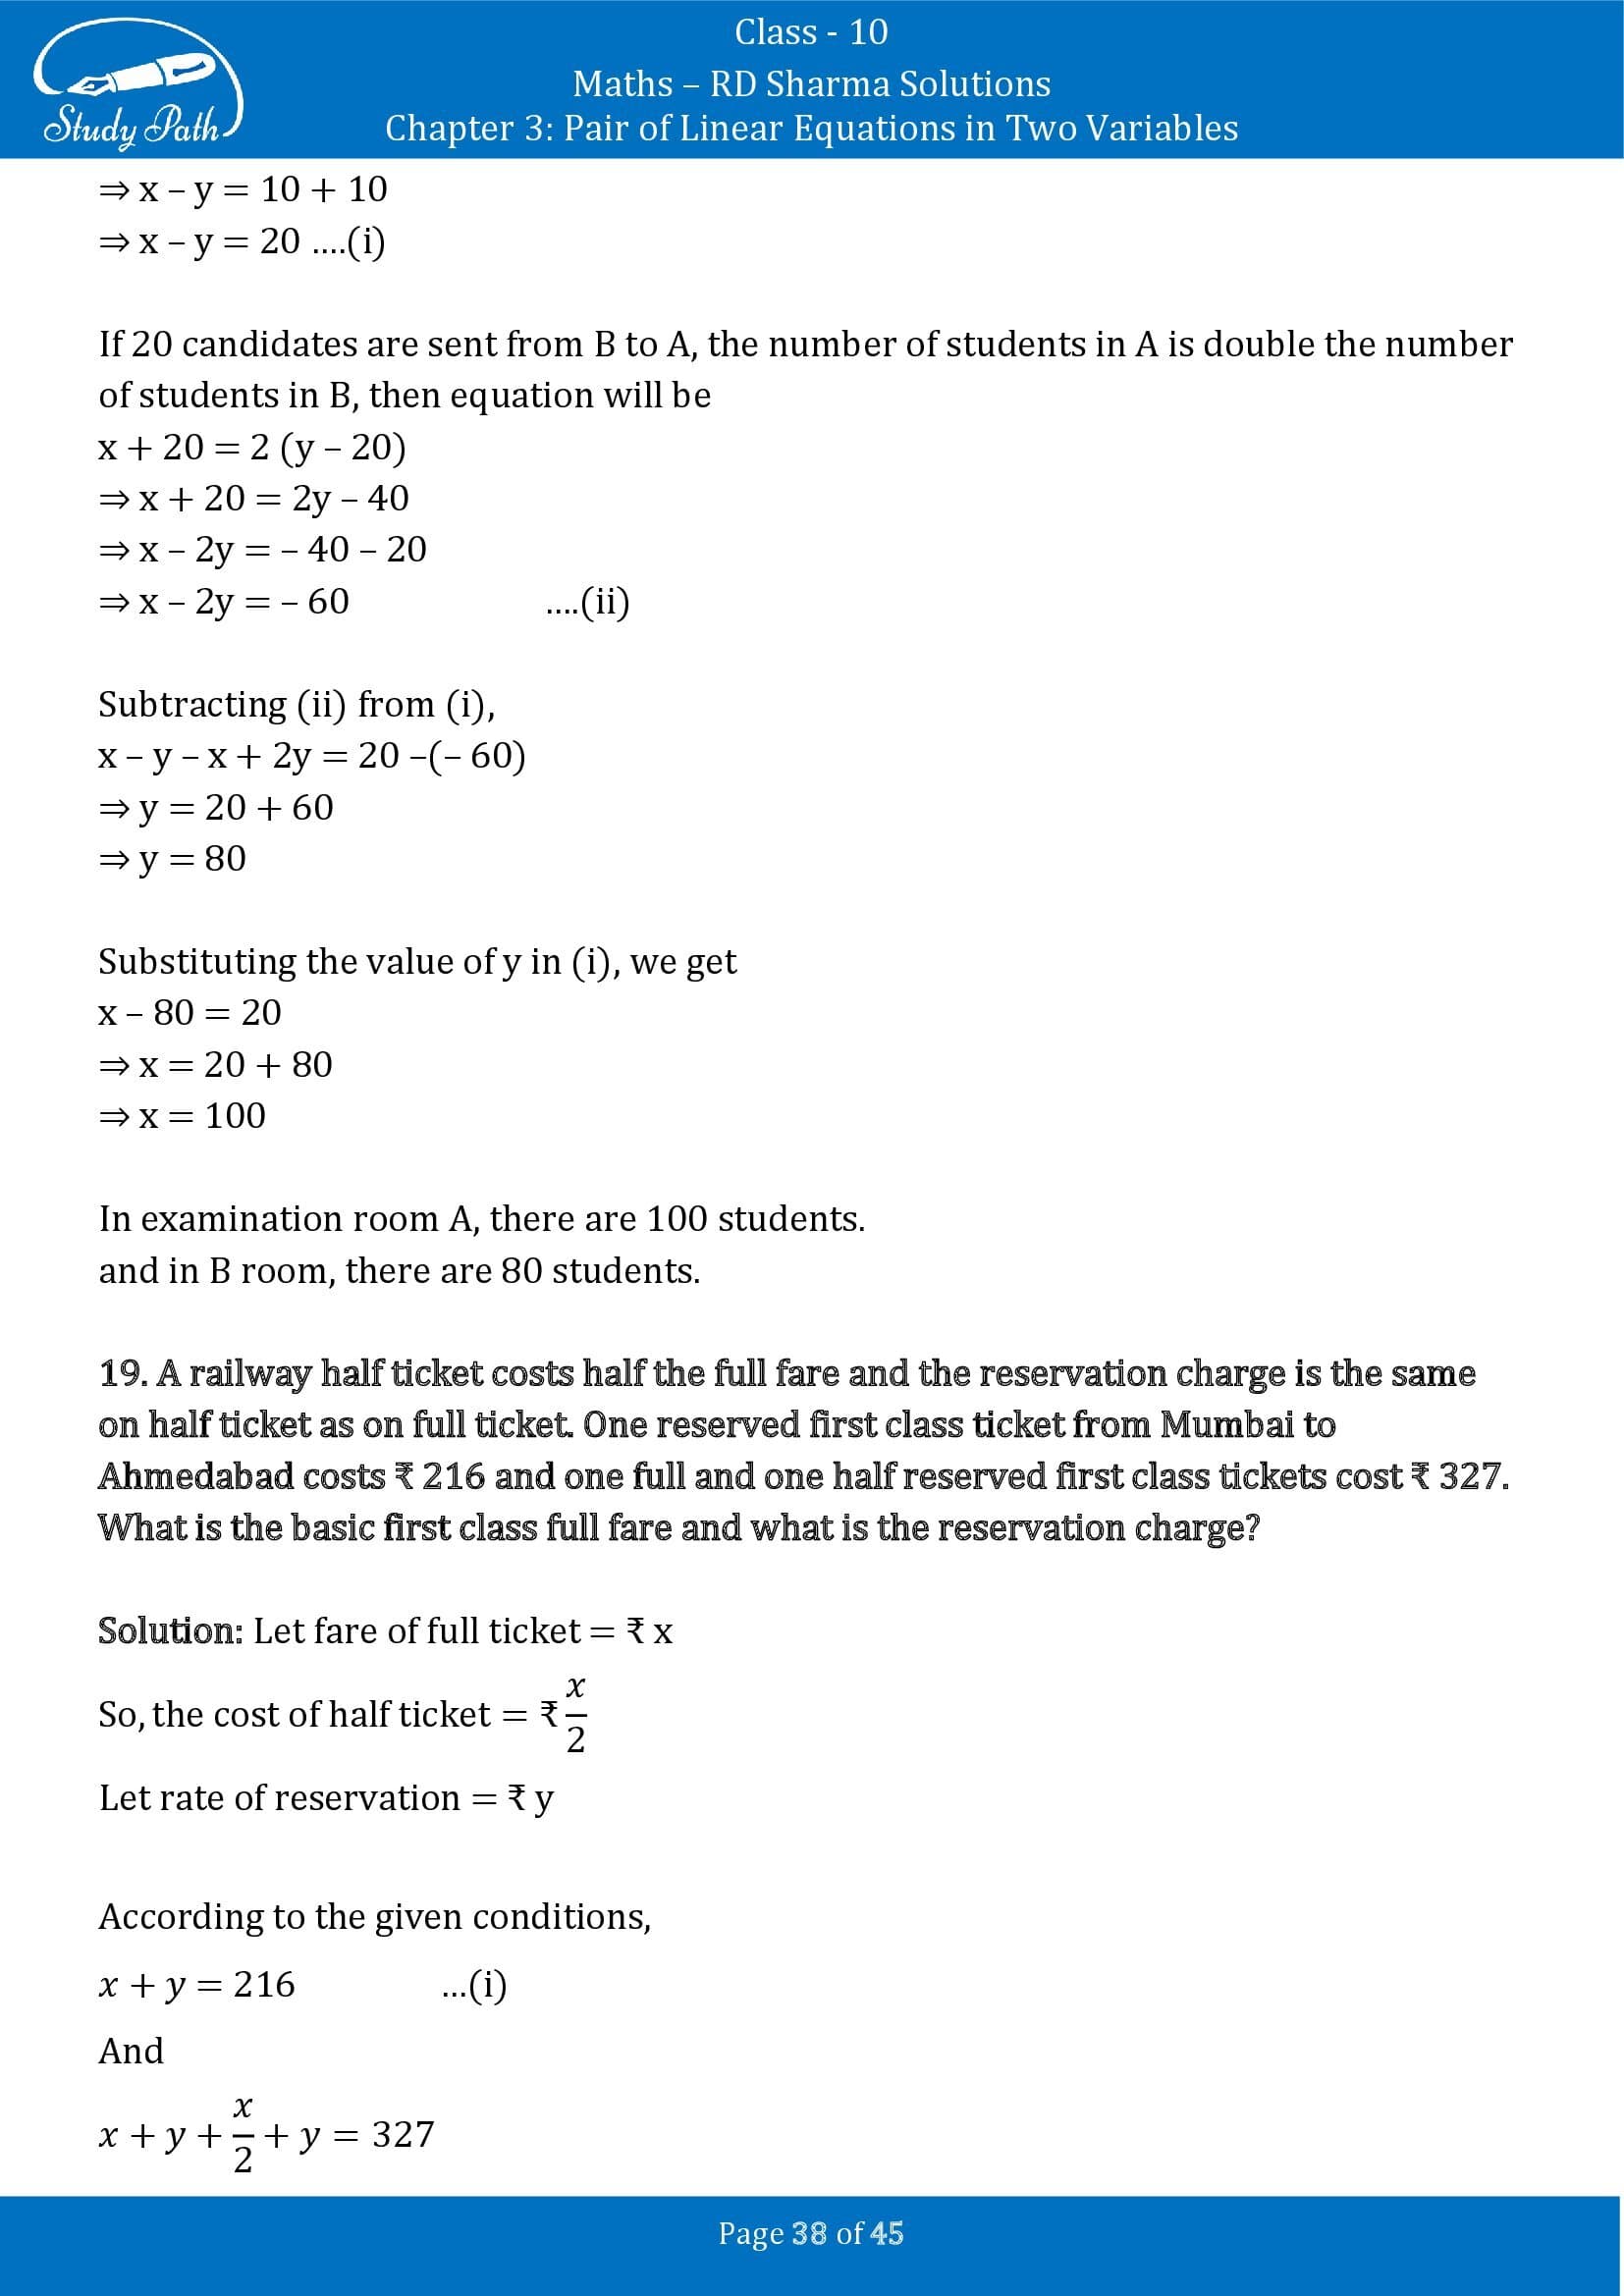 RD Sharma Solutions Class 10 Chapter 3 Pair of Linear Equations in Two Variables Exercise 3.11 00038